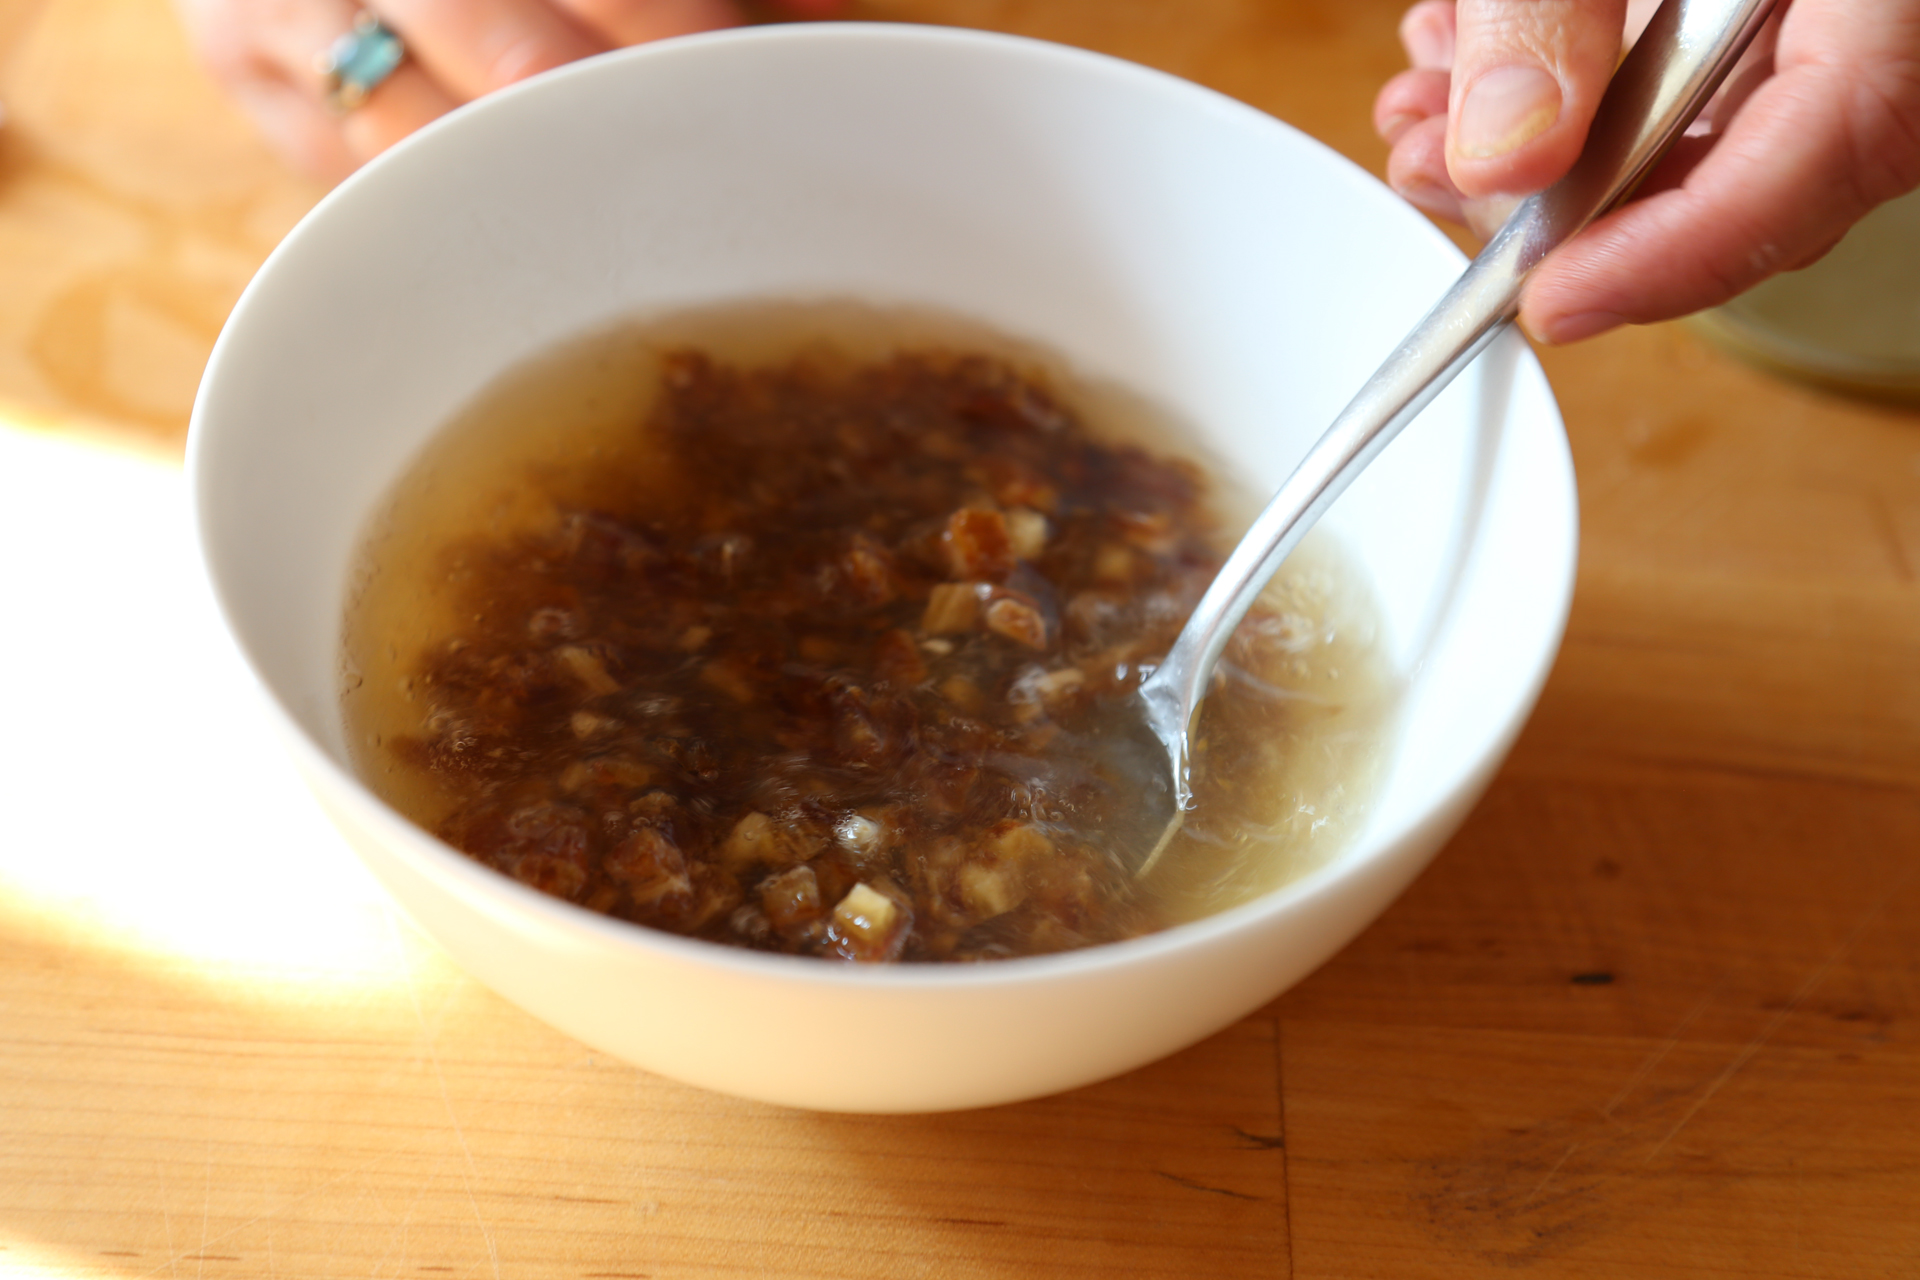 In a small bowl, combine the chopped dates and the baking soda with the boiling water, stirring to combine.